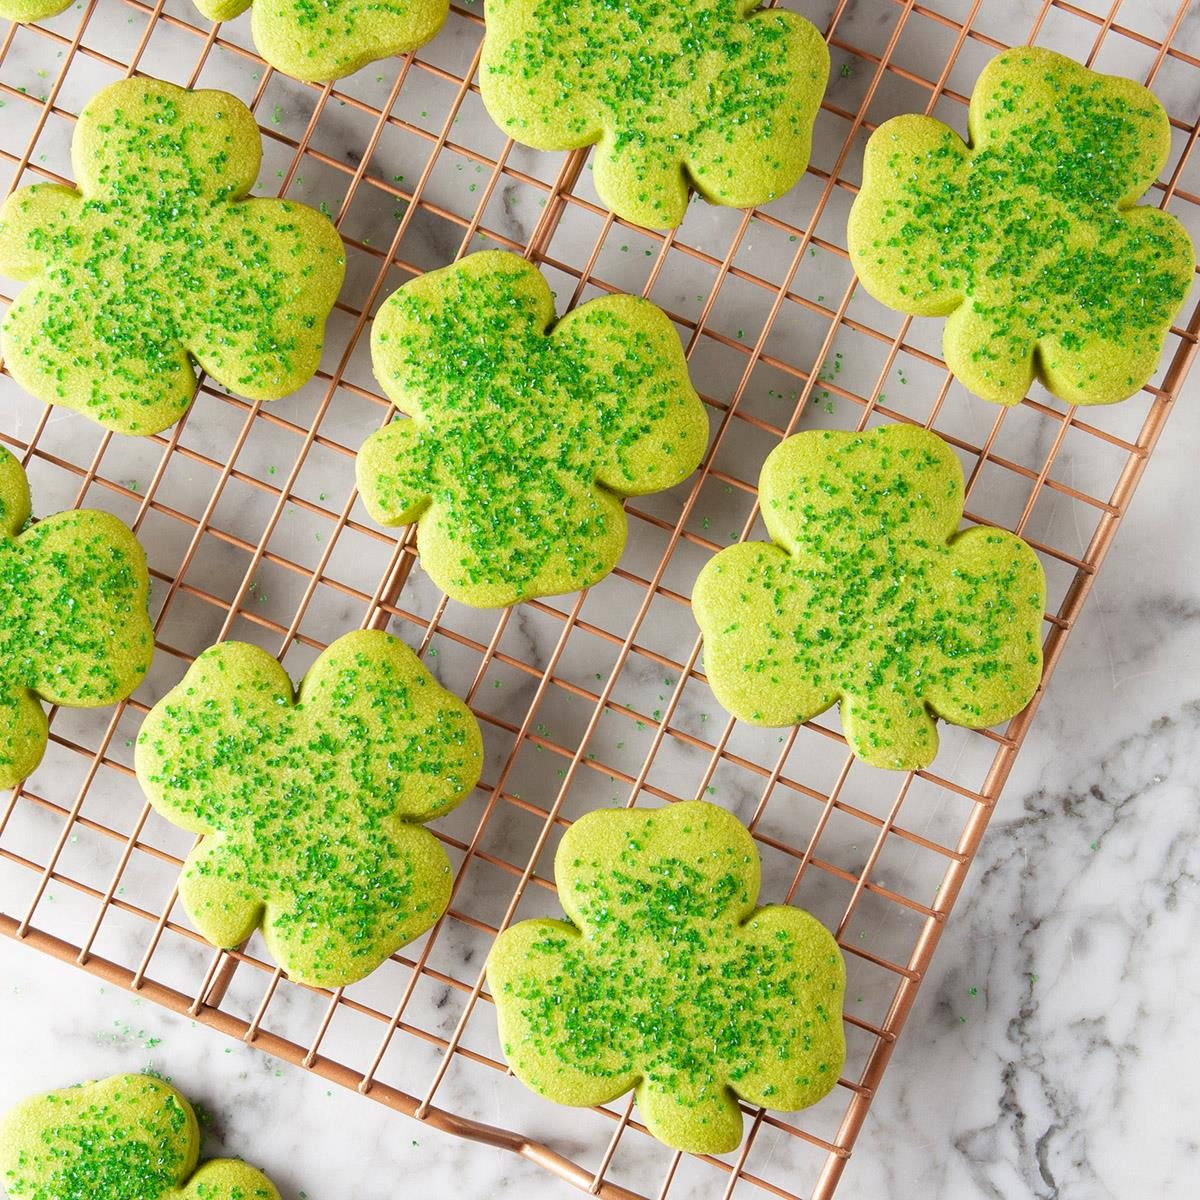 <p>A handy cookie cutter shapes these sensational sweets. With a hint of mint flavor, these shamrock cookies are especially yummy with cocoa or chocolate milk. —Edna Hoffman, Hebron, Indiana</p> <div class="listicle-page__buttons"> <div class="listicle-page__cta-button"><a href='https://www.tasteofhome.com/recipes/shamrock-cookies/'>Go to Recipe</a></div> </div>